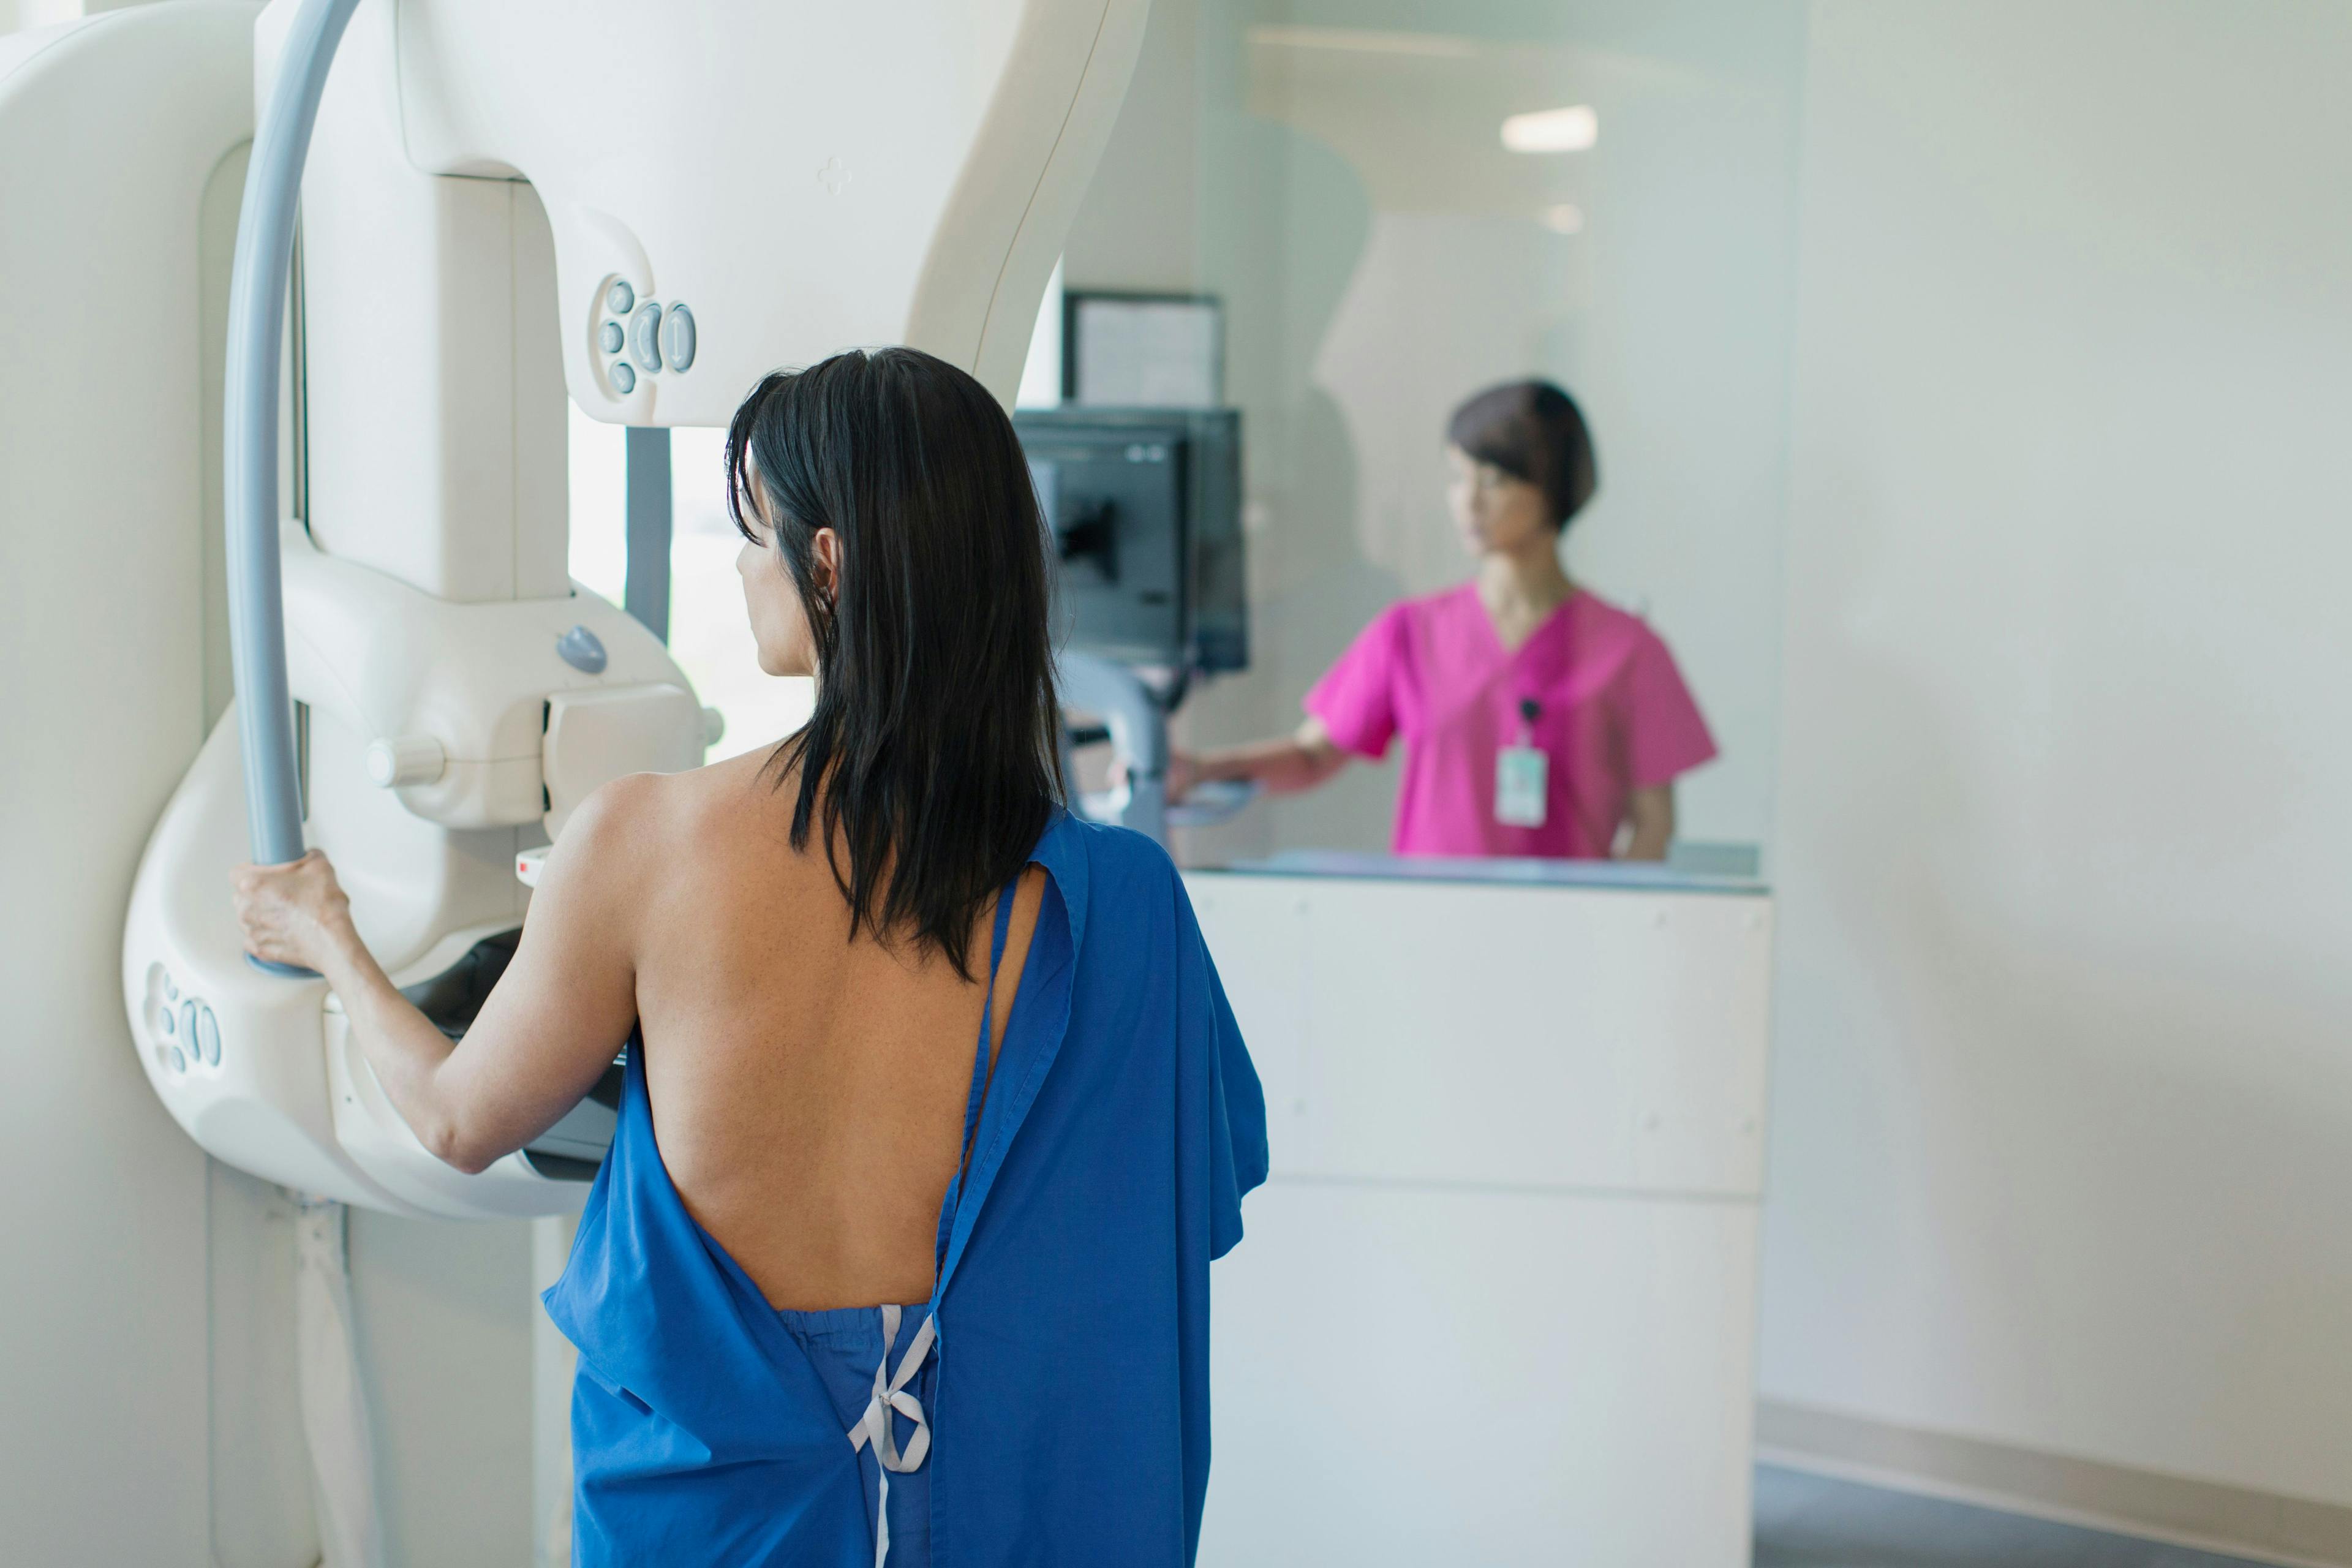 Breast cancer screenings have yet to return to pre-pandemic levels, researchers say. (Hero Images)